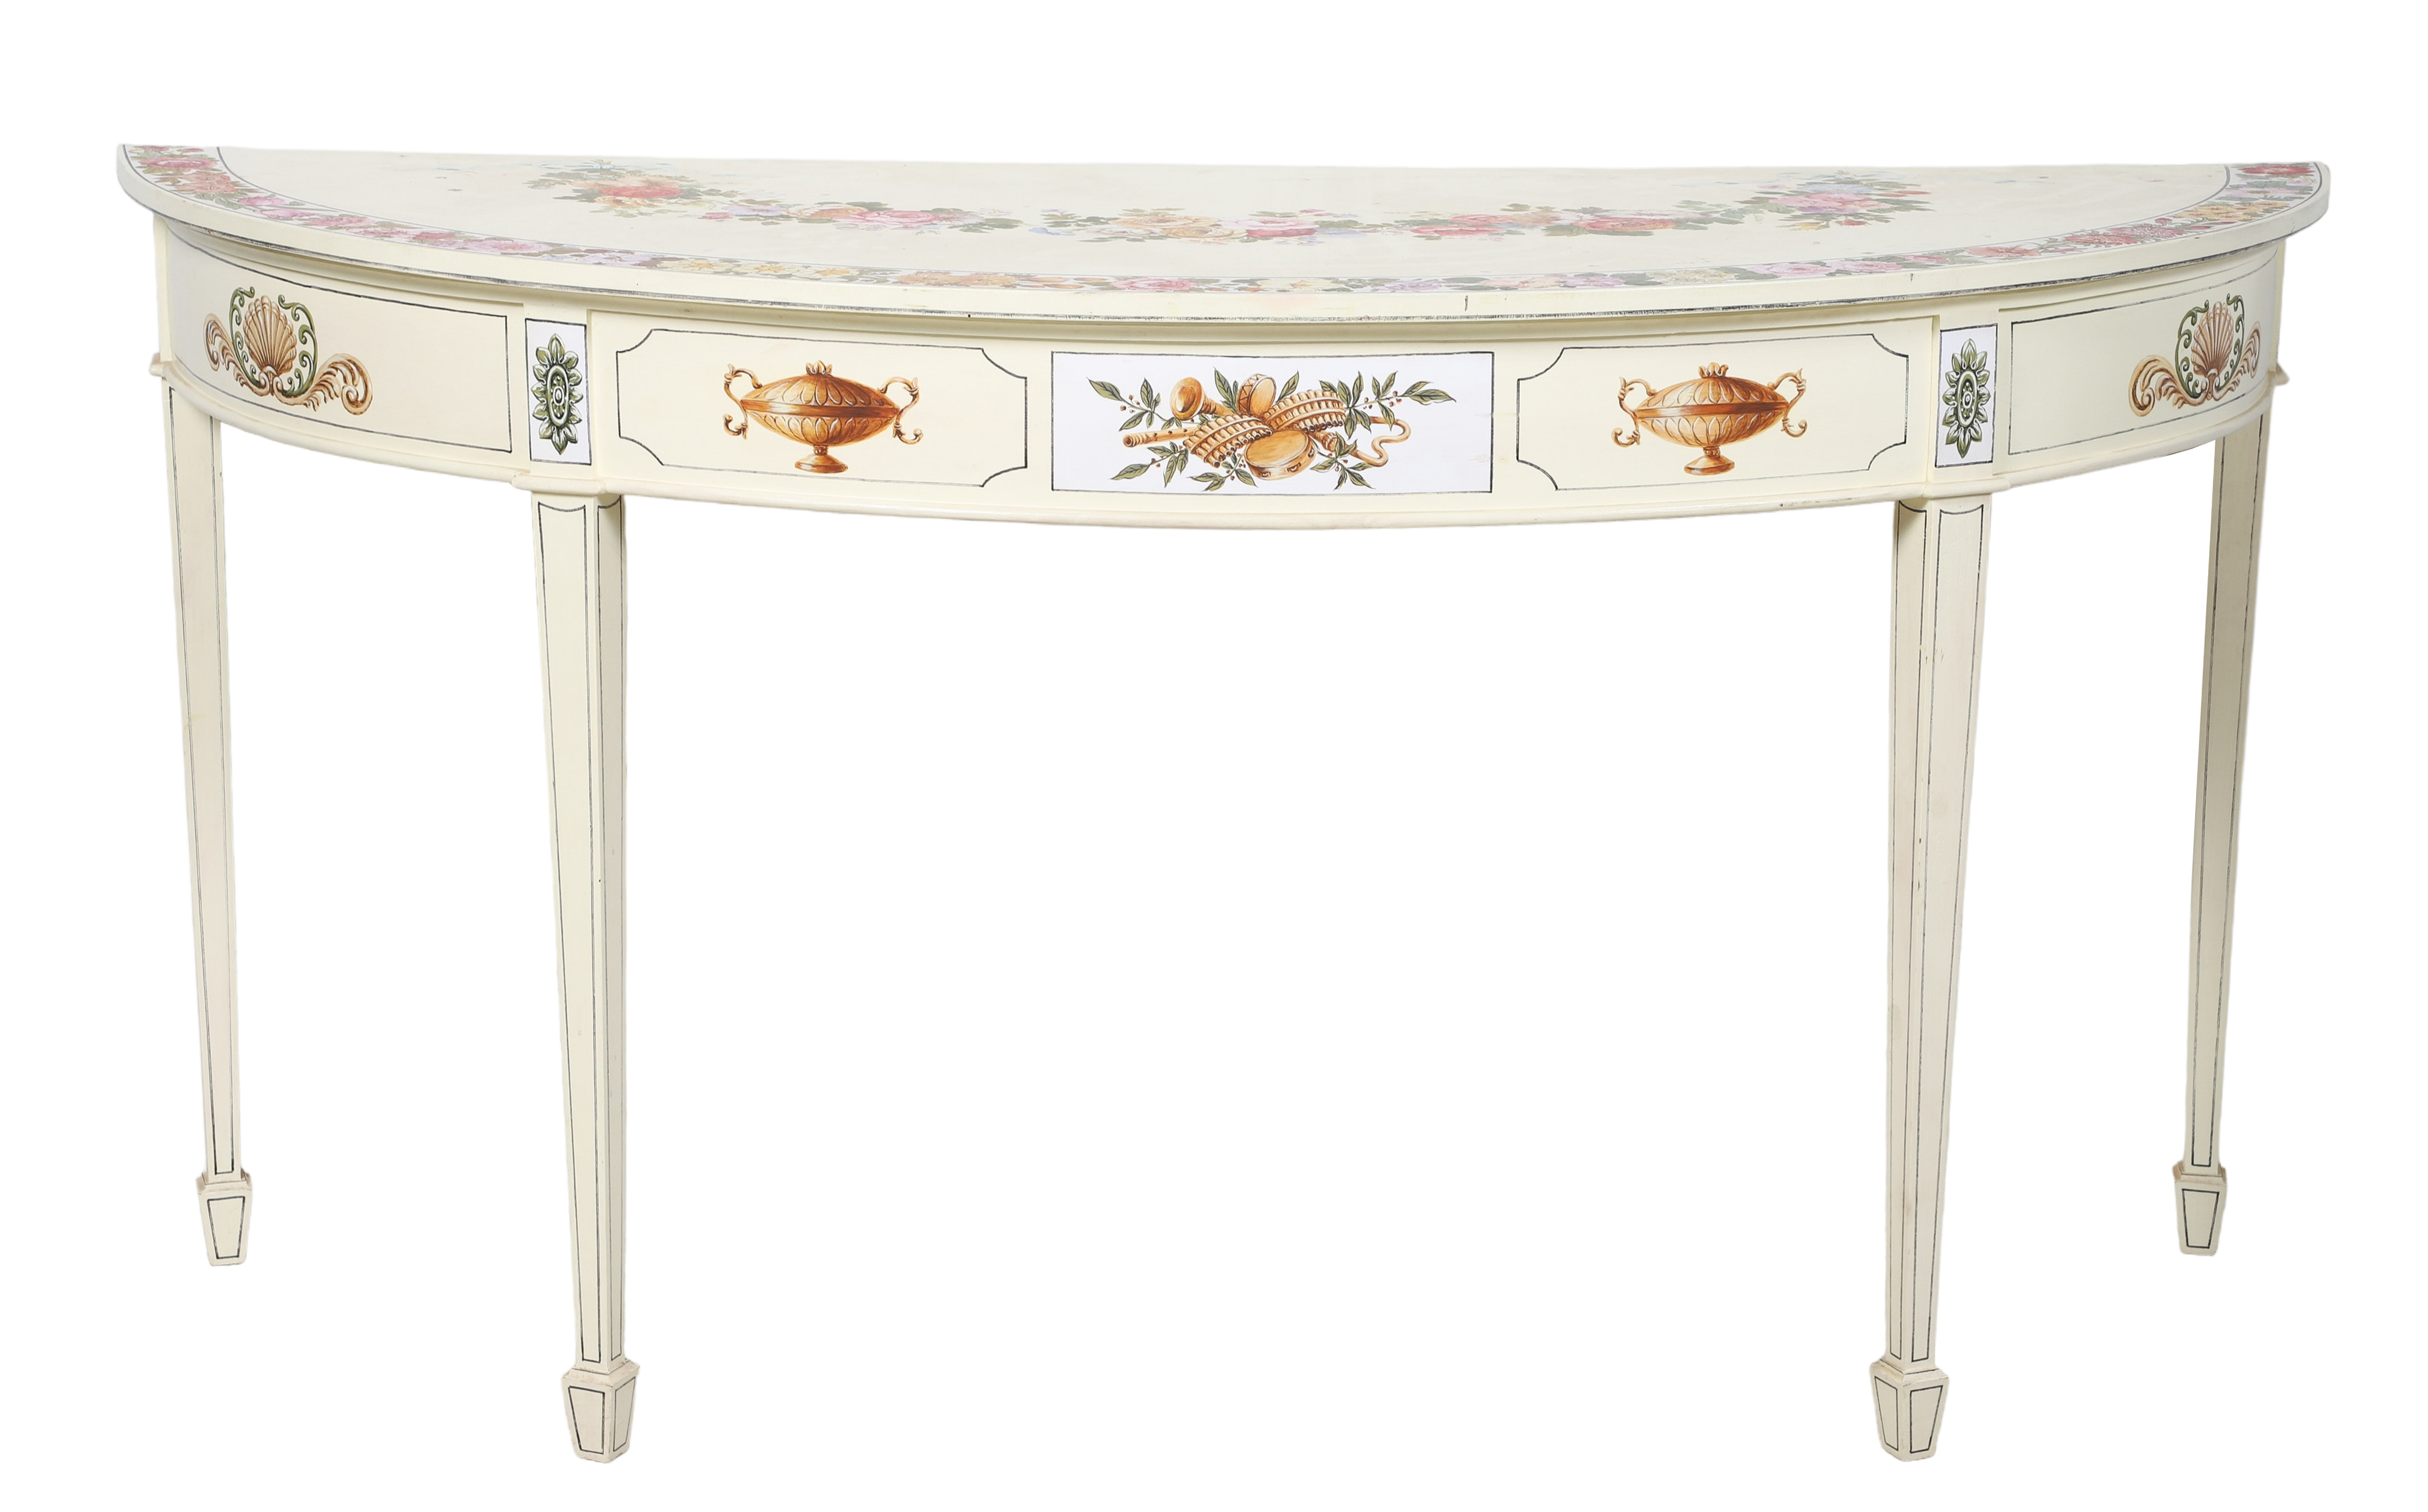 Adams style paint decorated demilune